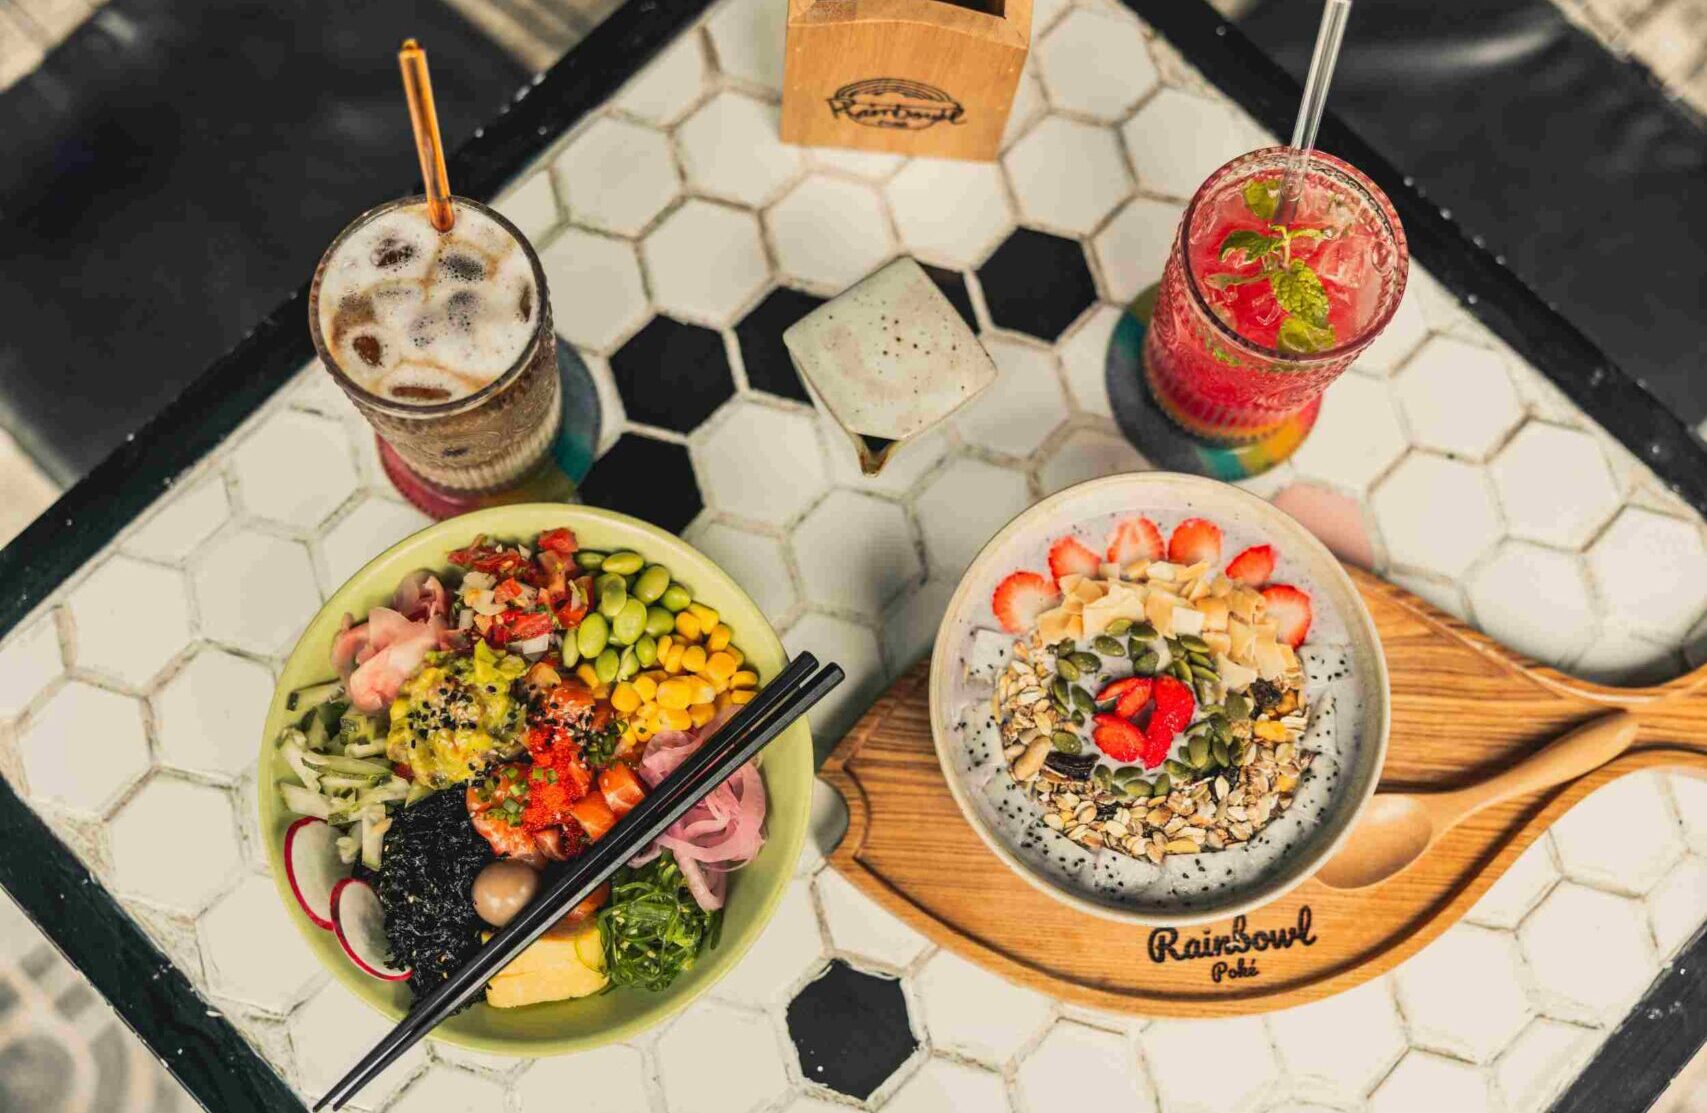 A table filled with Rainbowl Poke Food, including one Poke Bowl one Smoothie Bowl and two juices